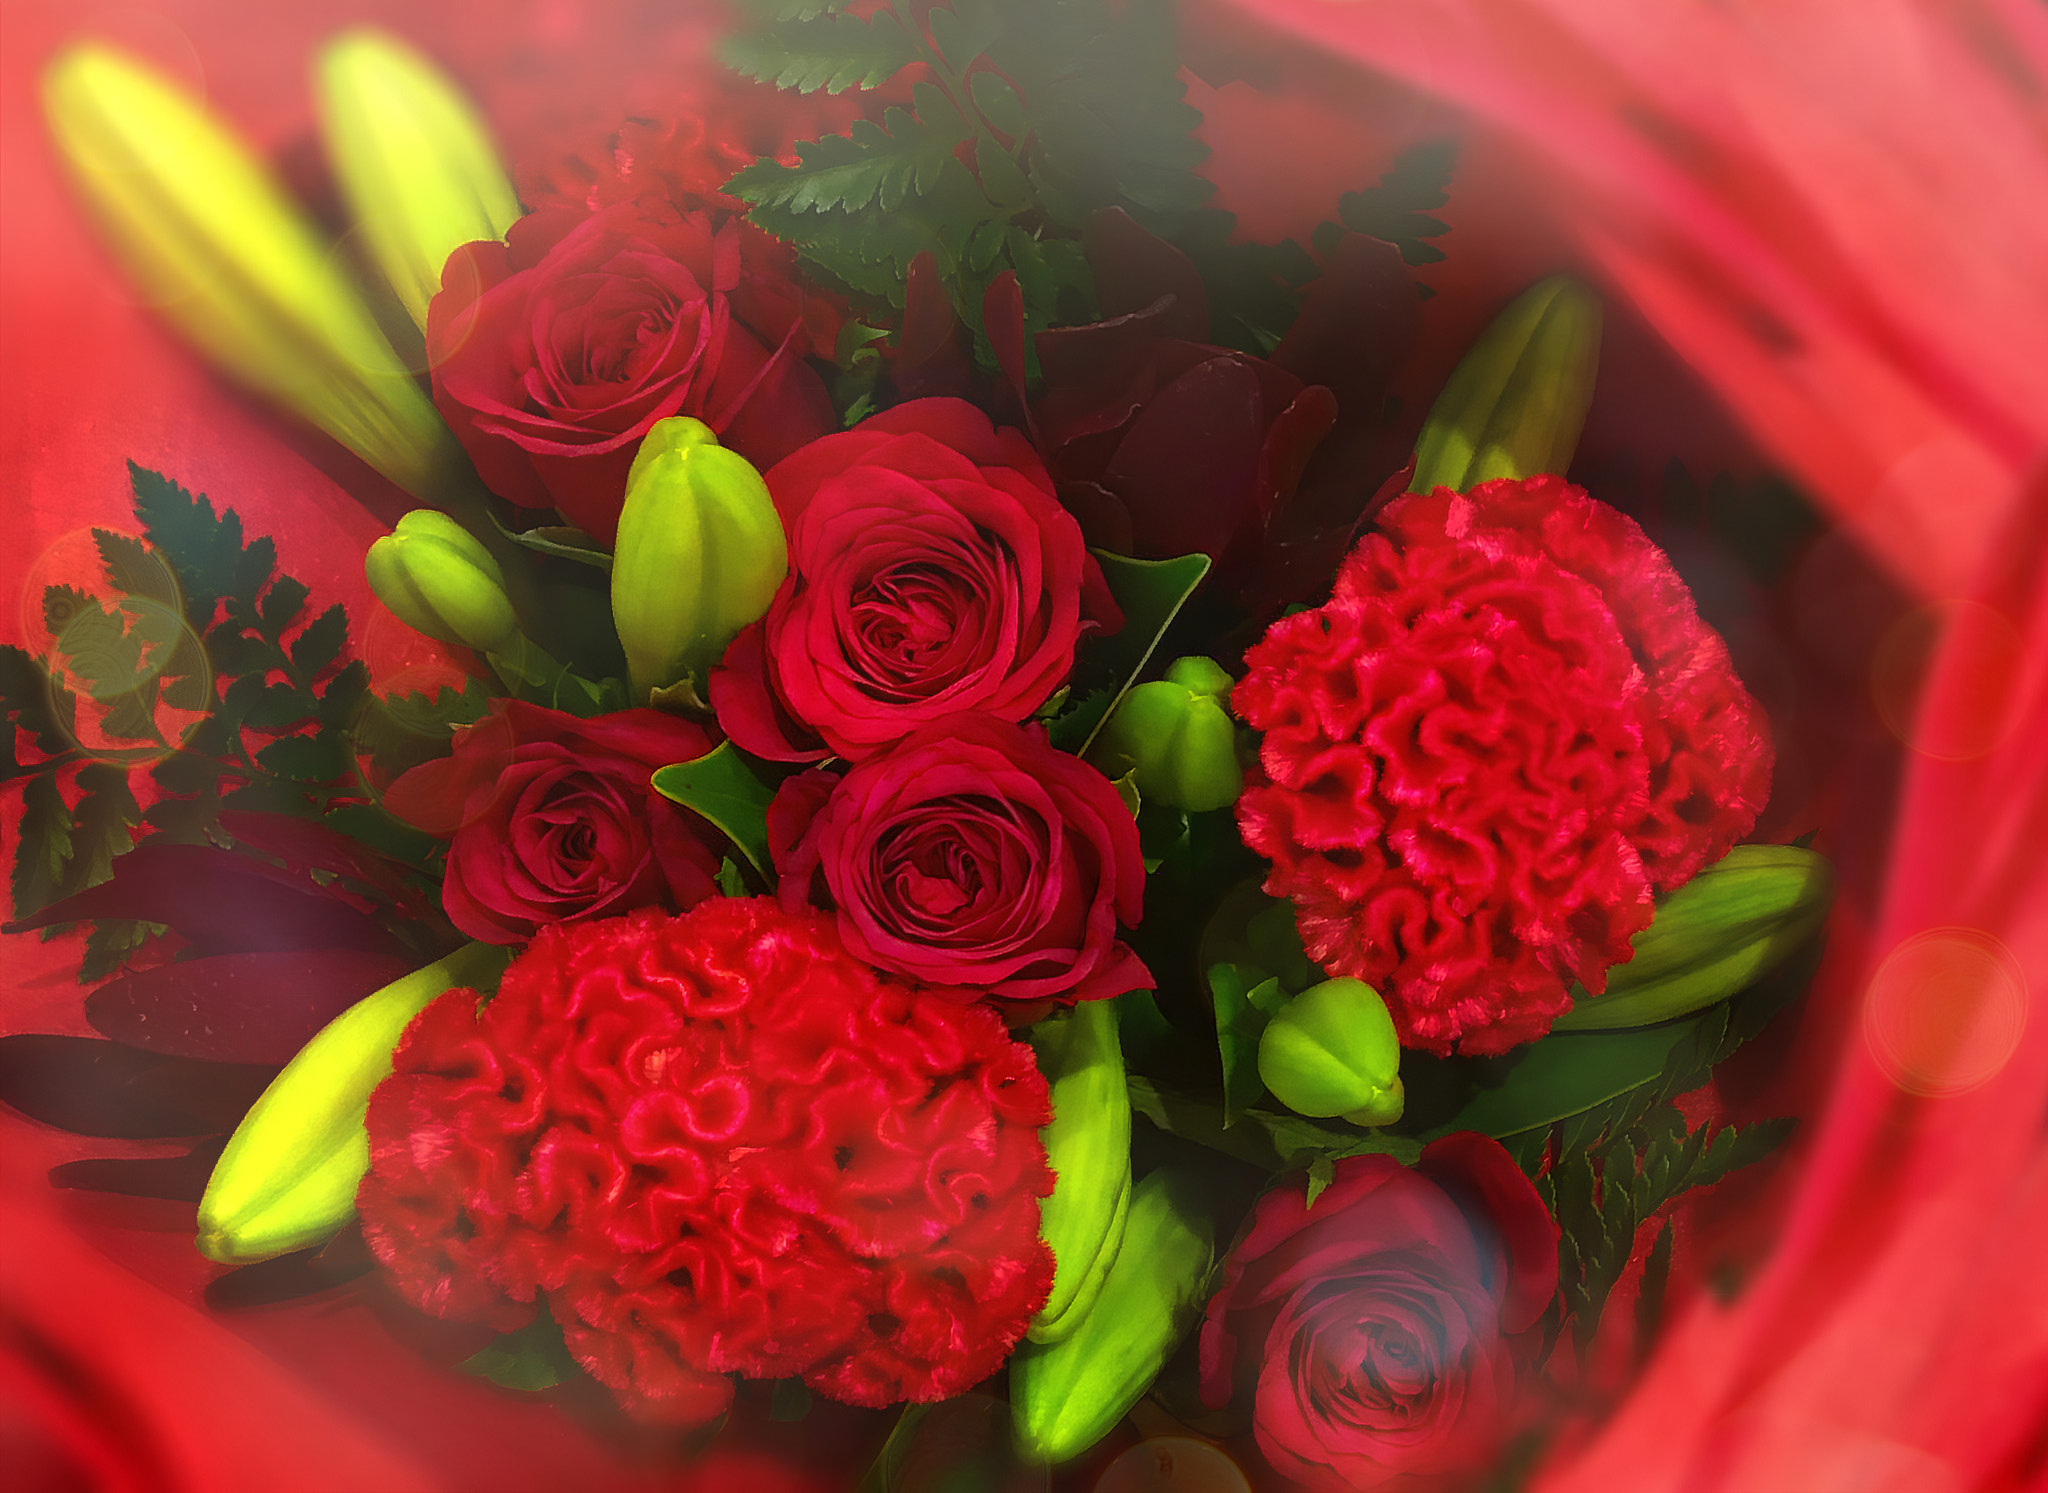 Greeting bouquet of red roses - free photo